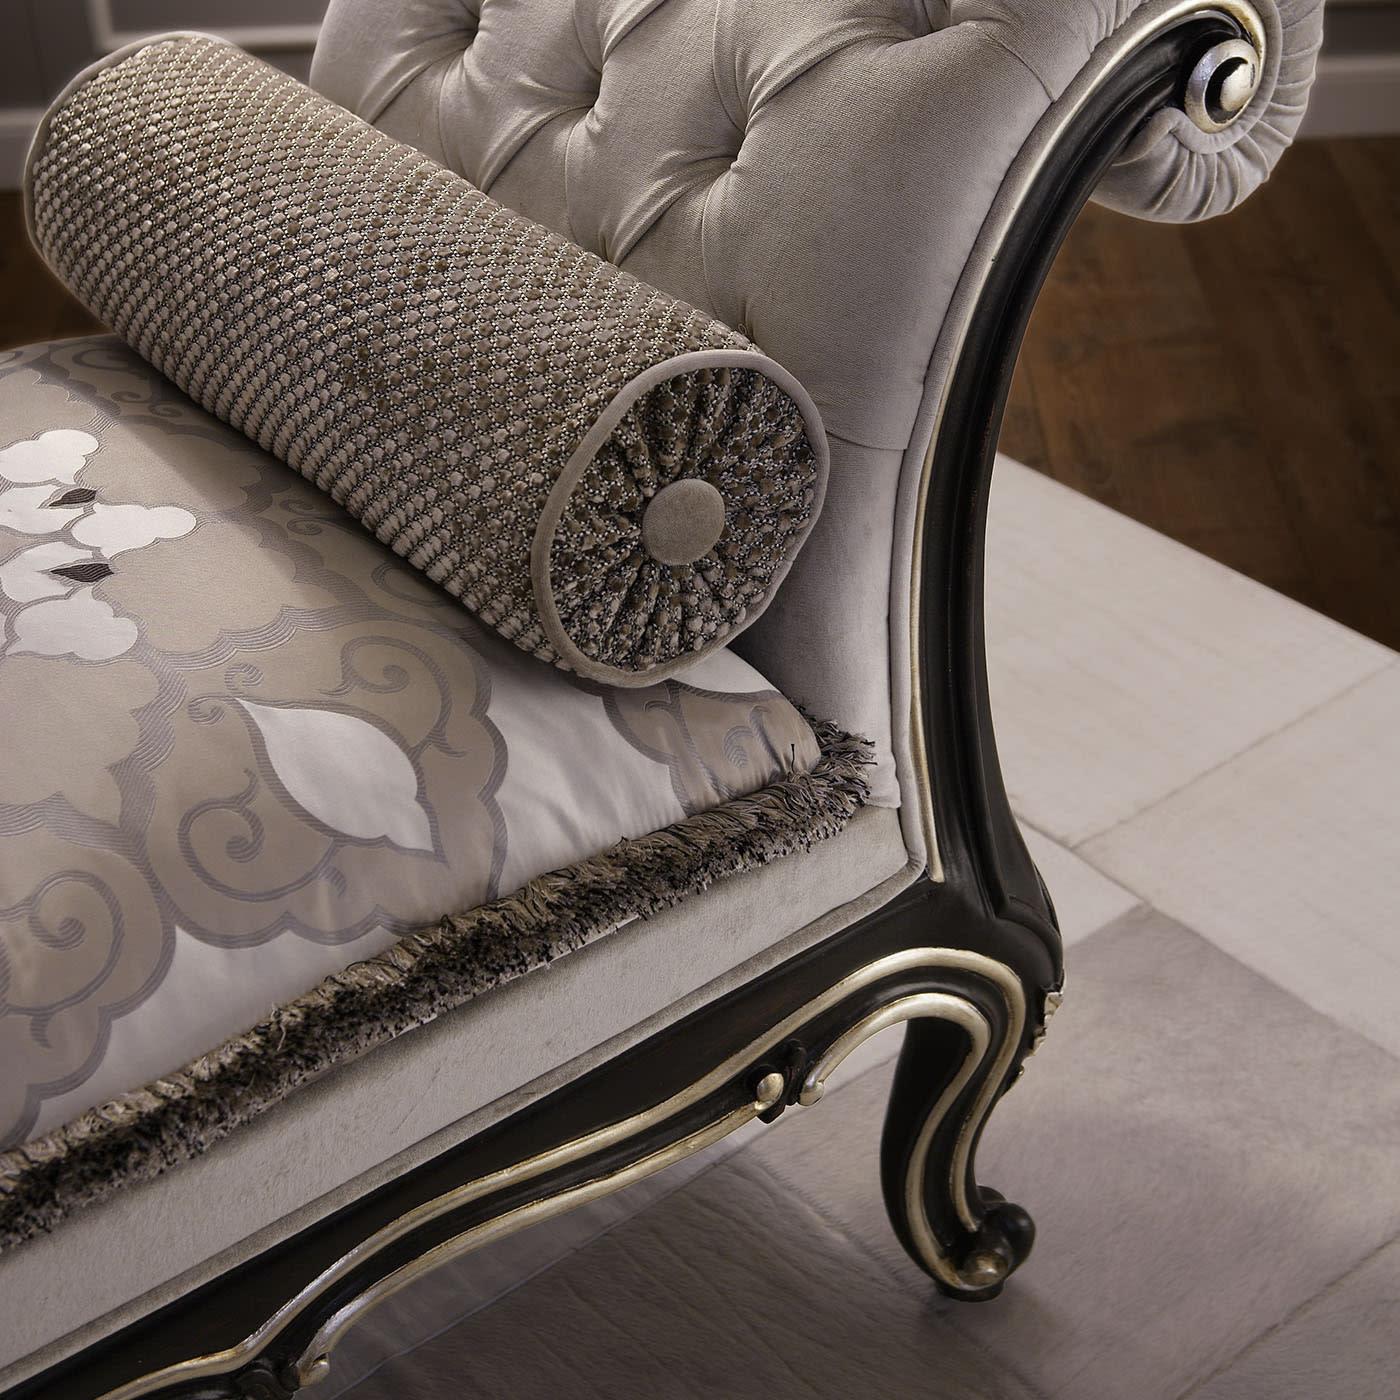 Ideally complementing modern interiors of Baroque inspiration, this dormeuse exemplifies carving mastery. The sinuous inlays accenting the solid black-finished wooden frame are further enhanced by shimmering silver leaf profiles well harmonizing